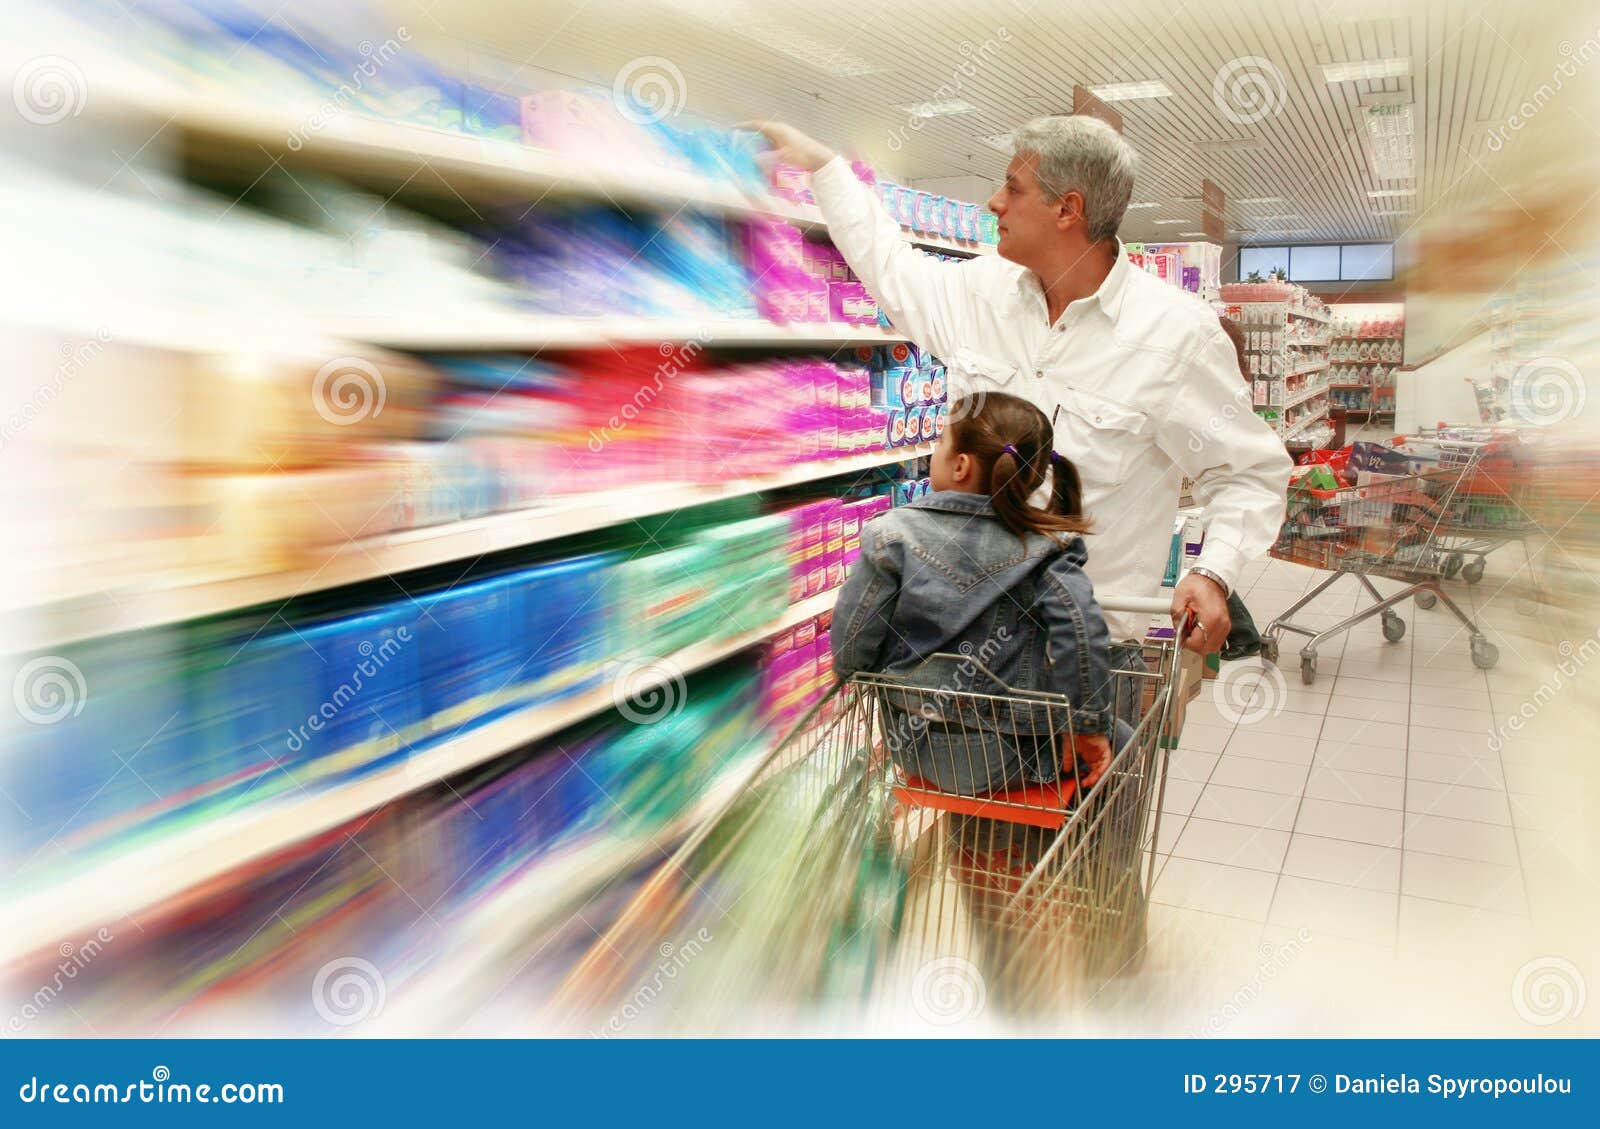 shopping at the supermarket